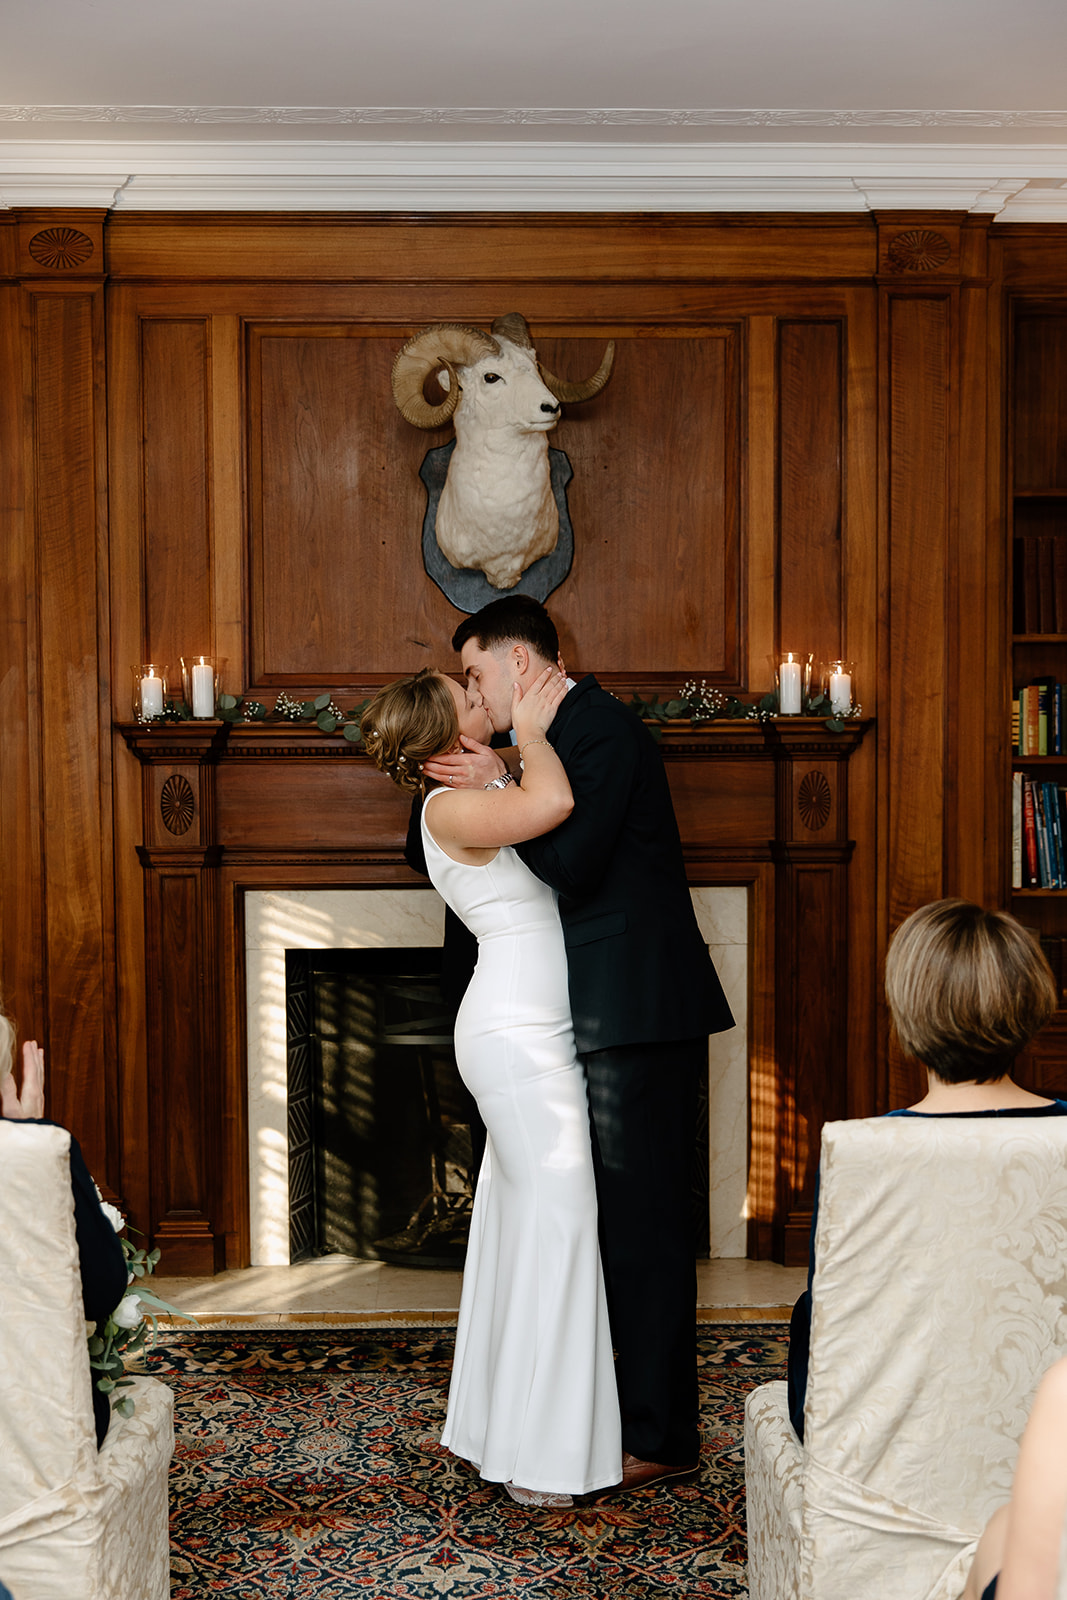 Bride and groom share first kiss during ceremony